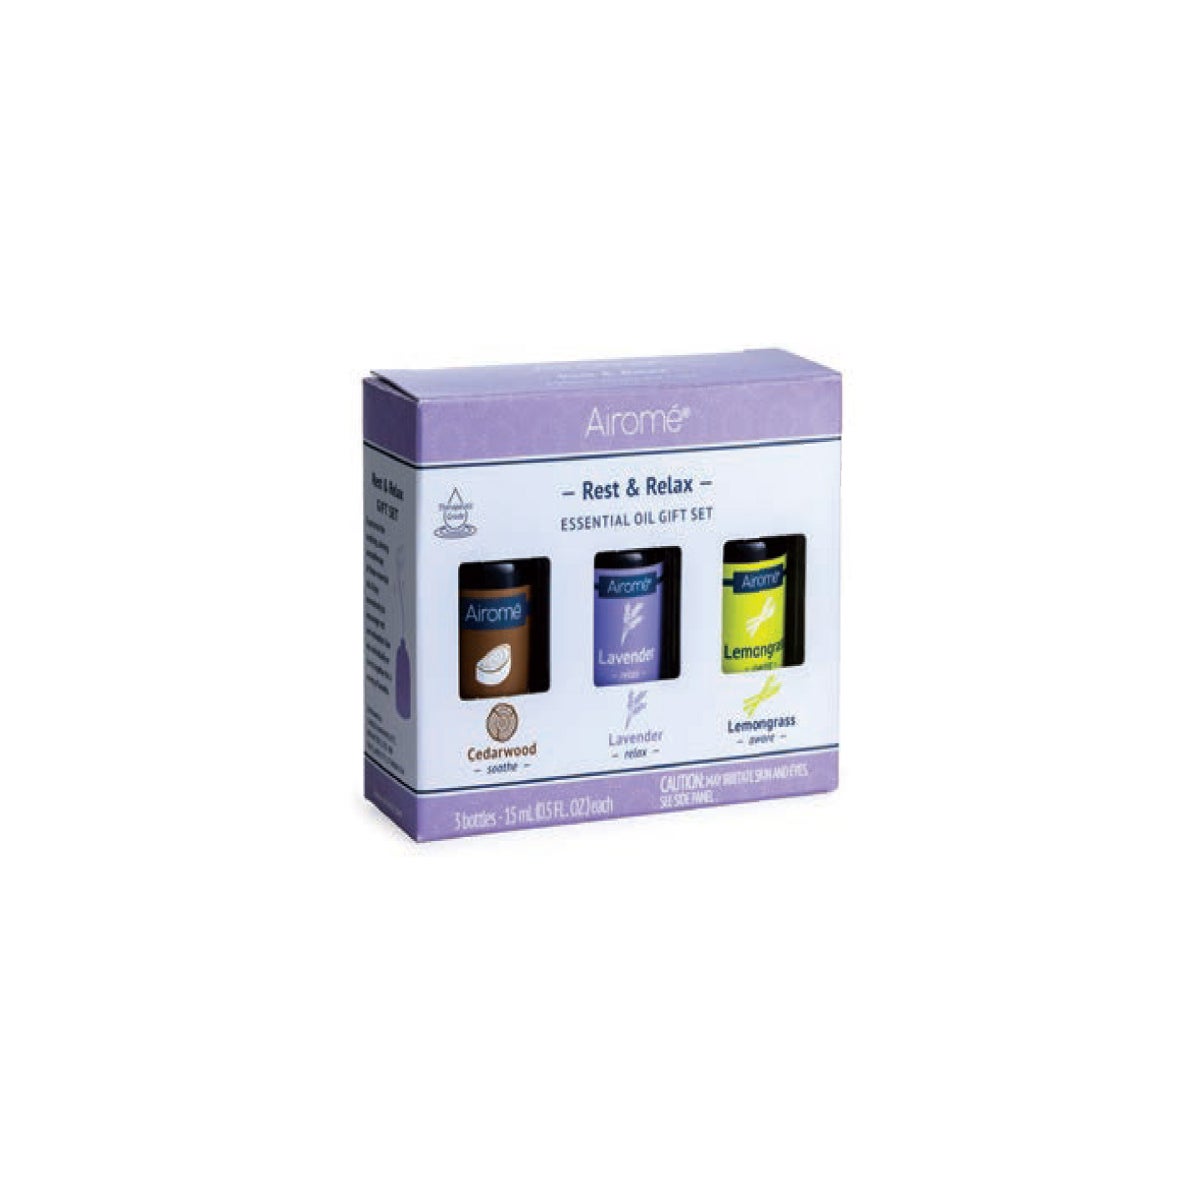 Essential Oils Gift Set - Rest and Relax 15 ml